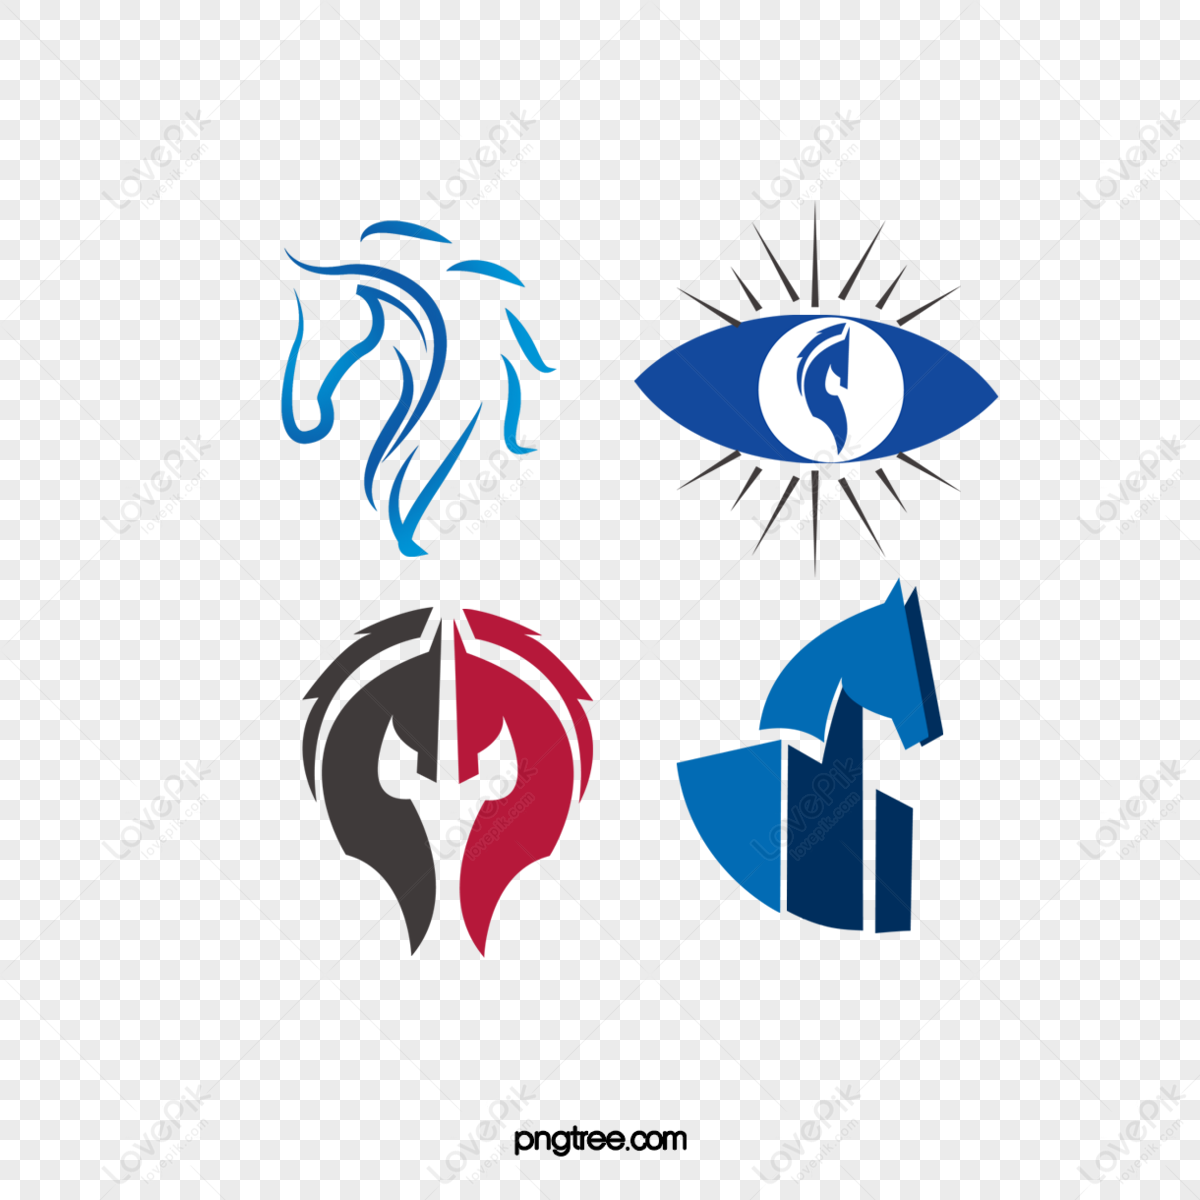 Horse Logo Design for Sale | Ready to Buy Horse Emblems